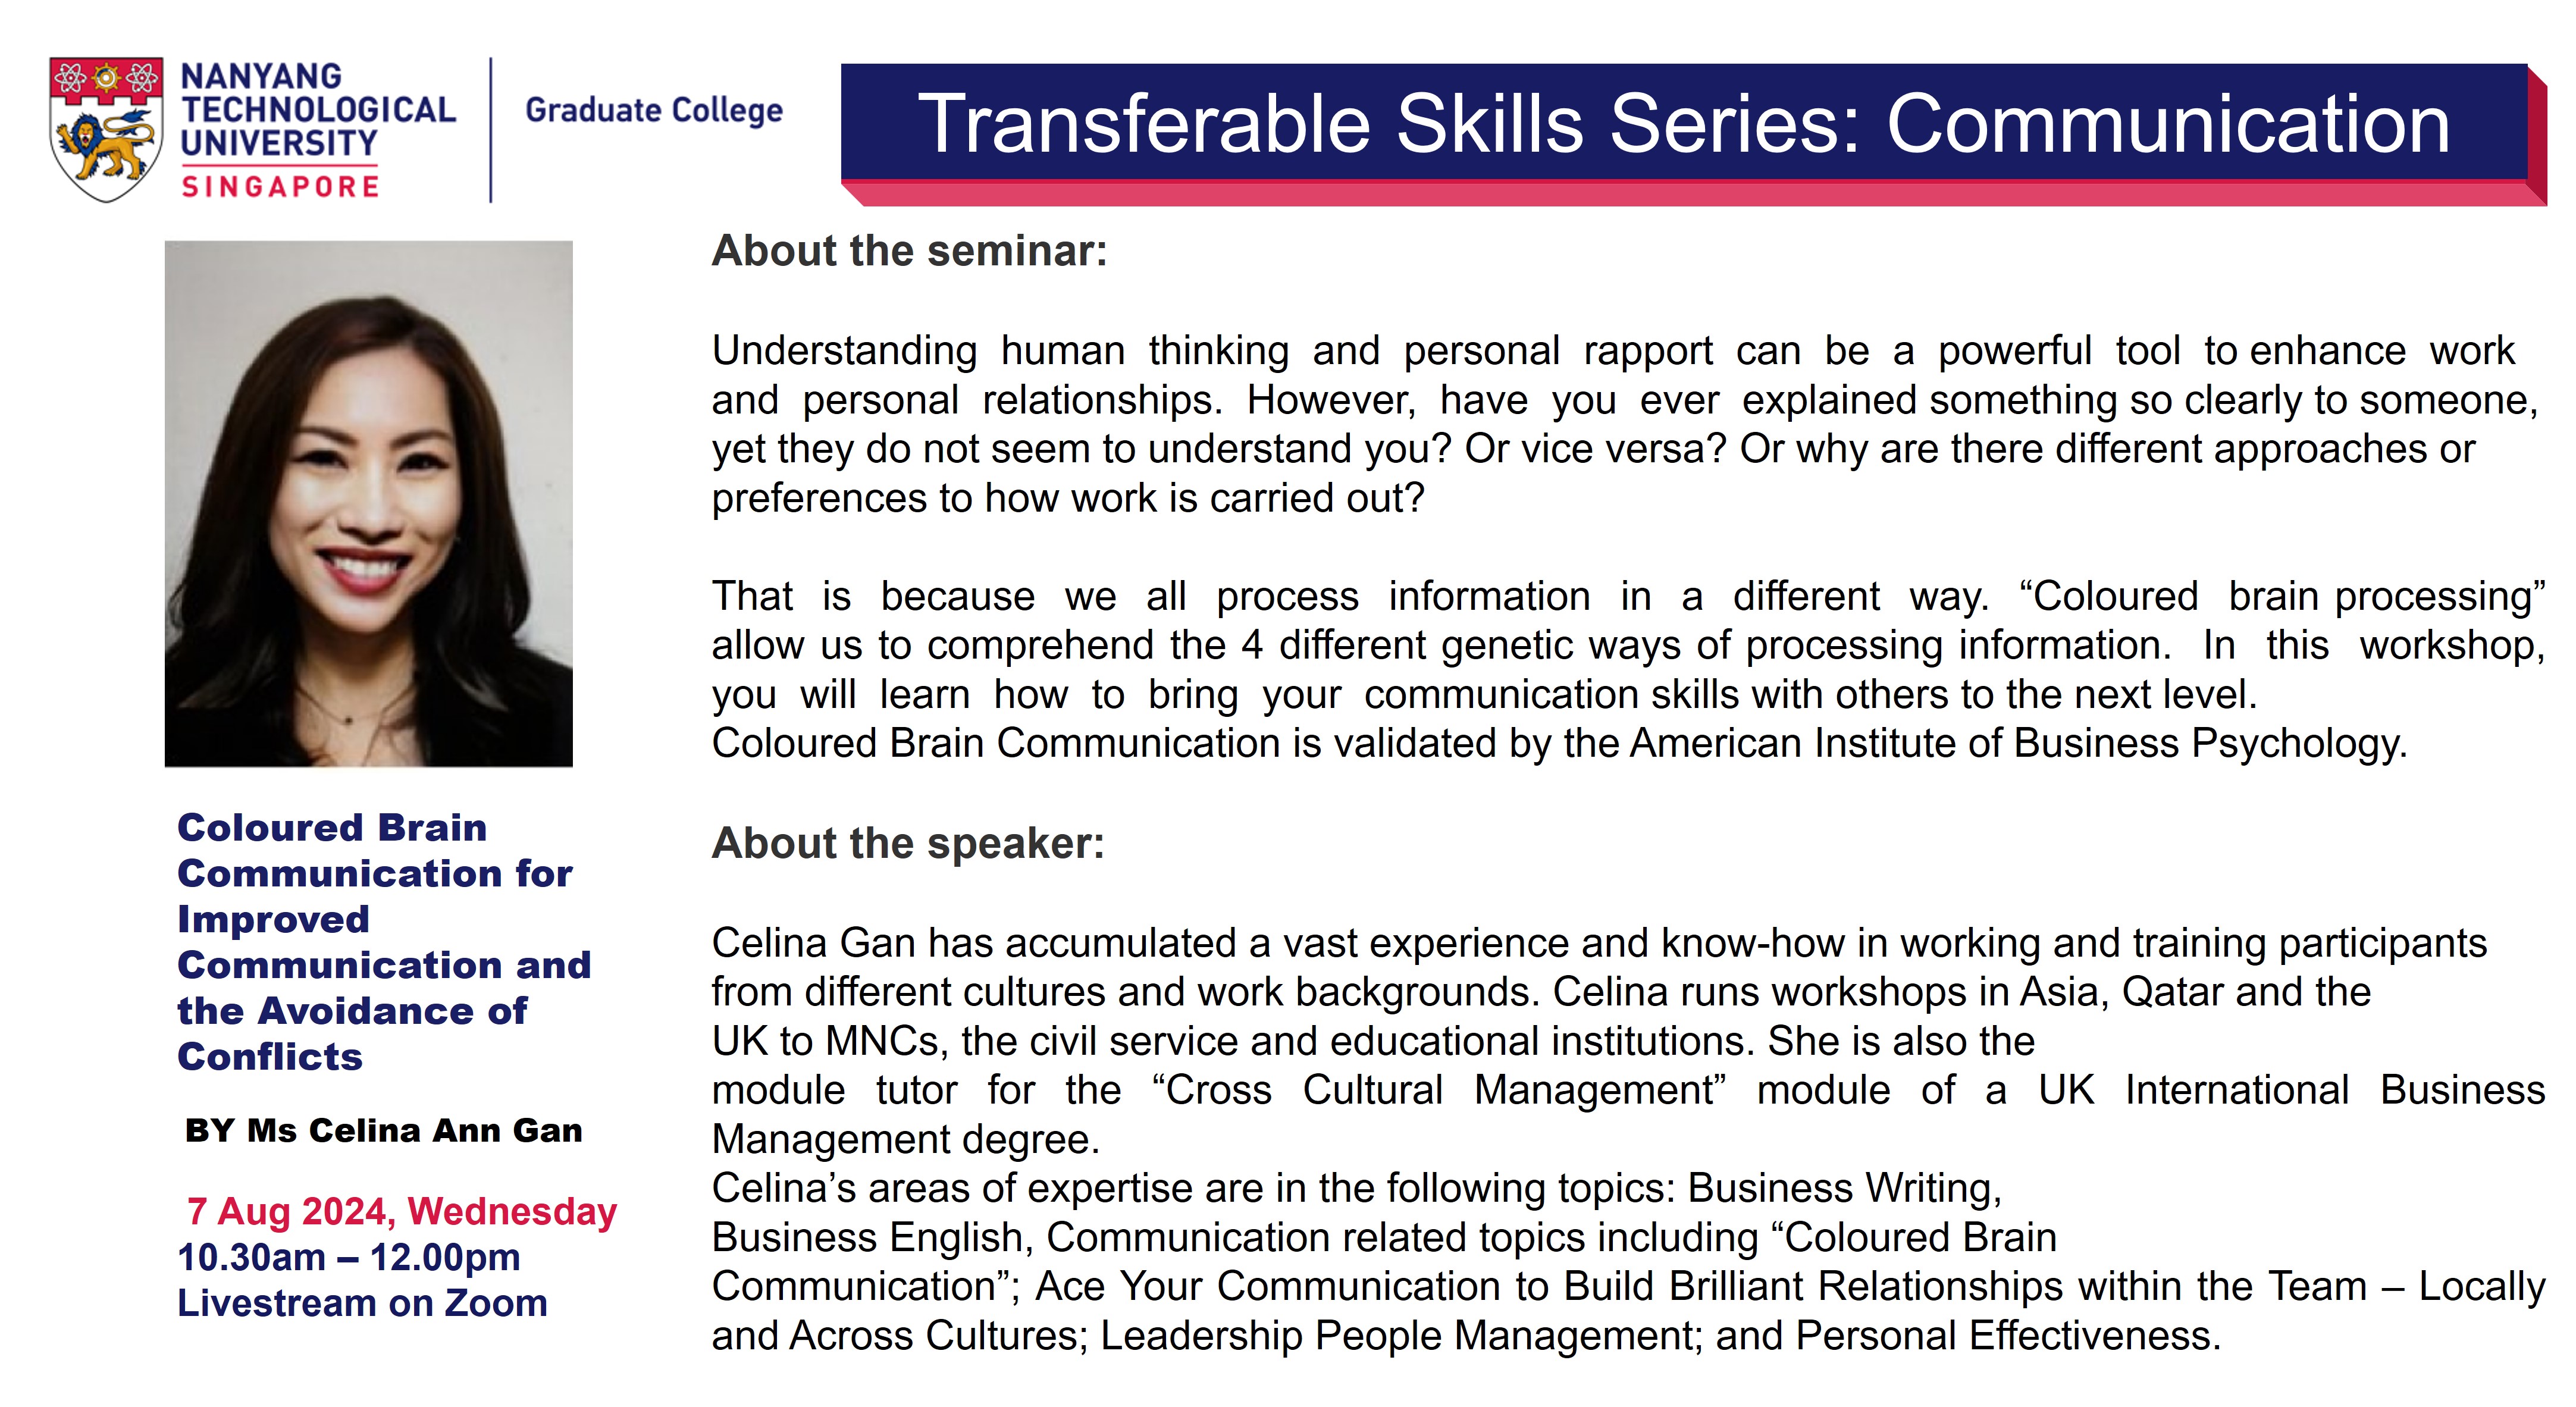 7 Aug - Coloured Brain Communication for Improved Communication and the Avoidance of Conflicts